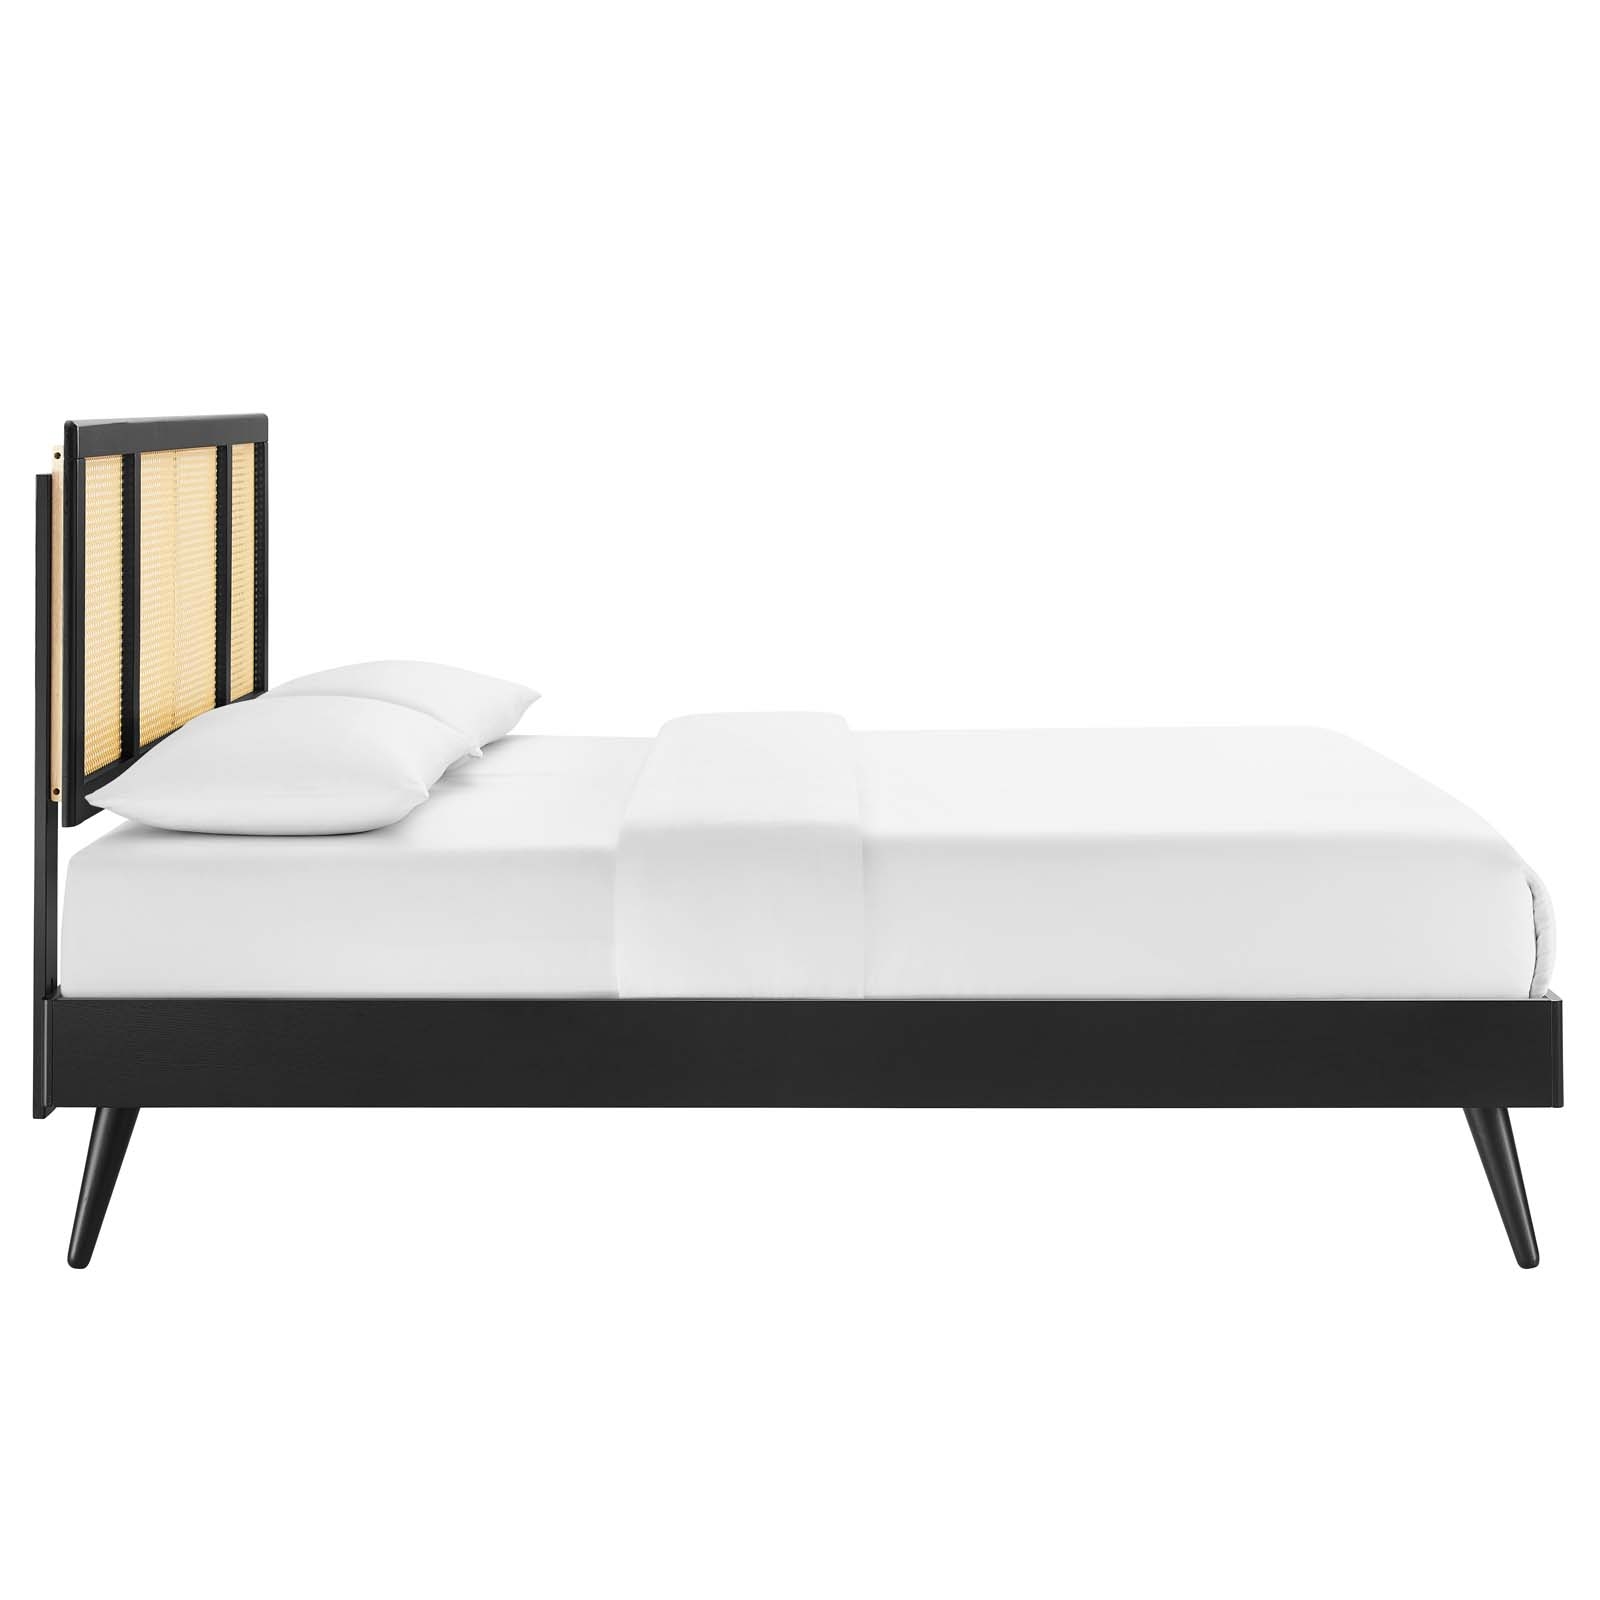 Kelsea Cane And Wood Queen Platform Bed With Splayed Legs, Black